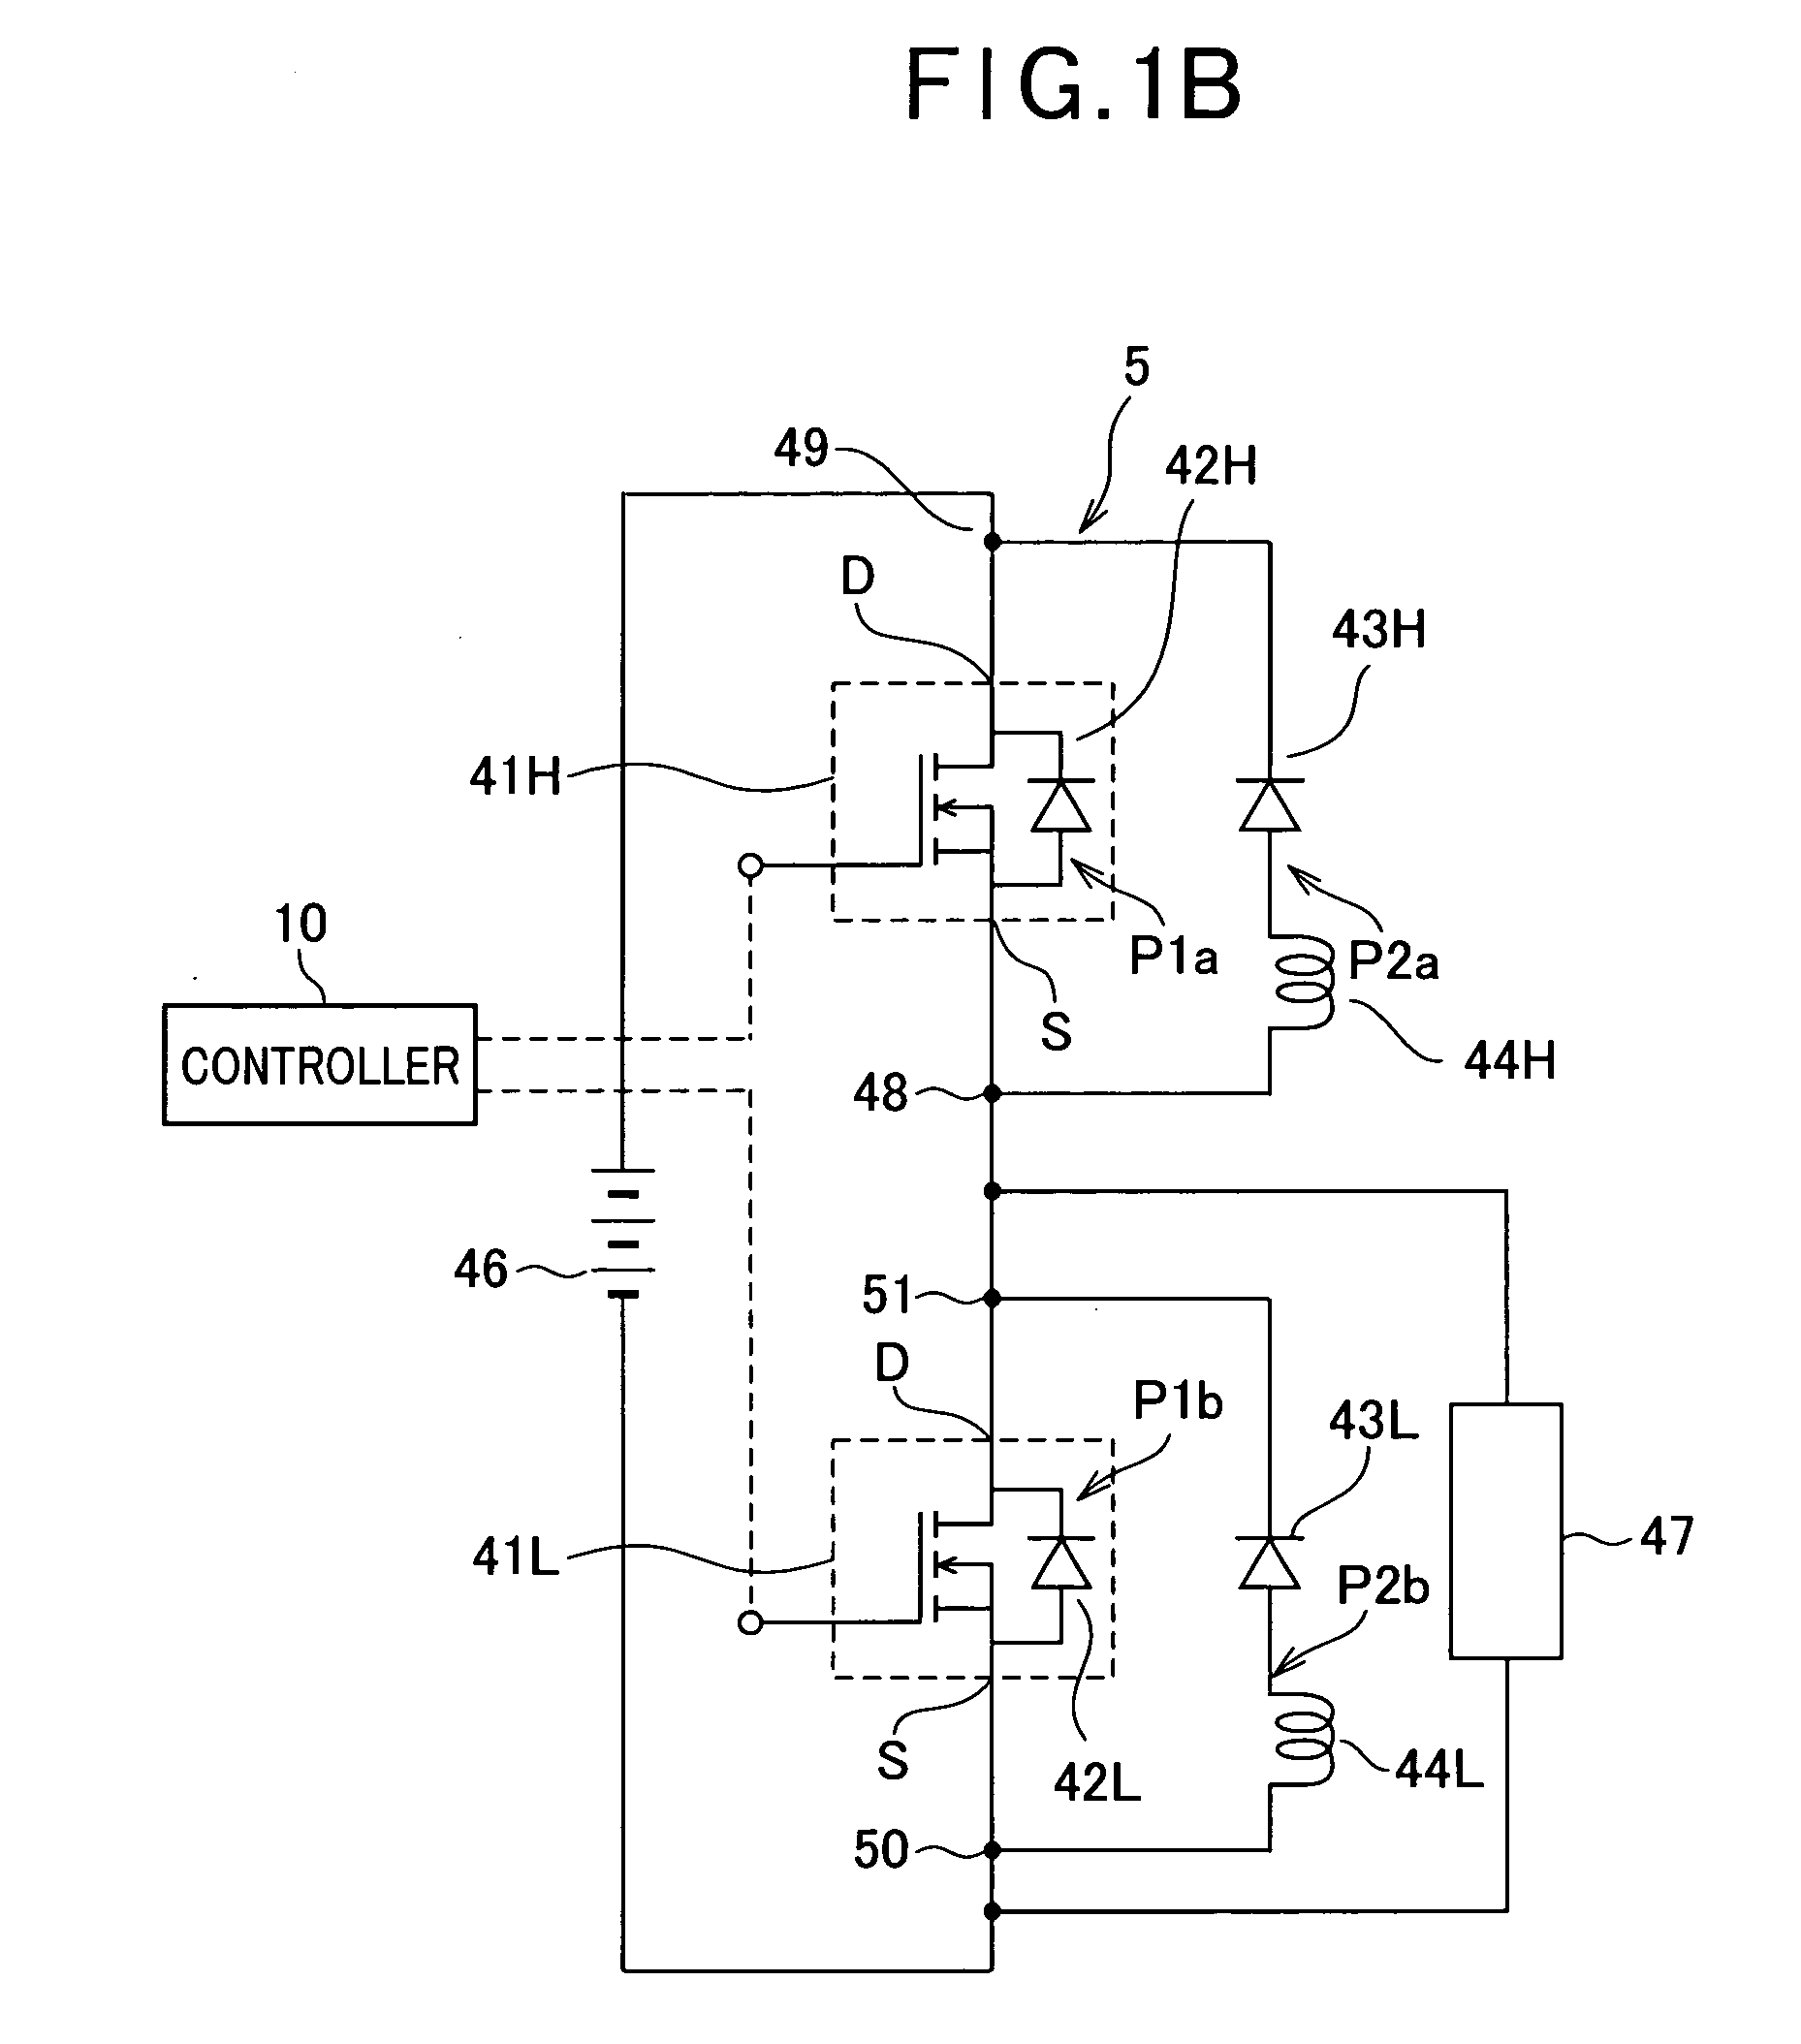 Power switching circuit improved to reduce loss due to reverse recovery current